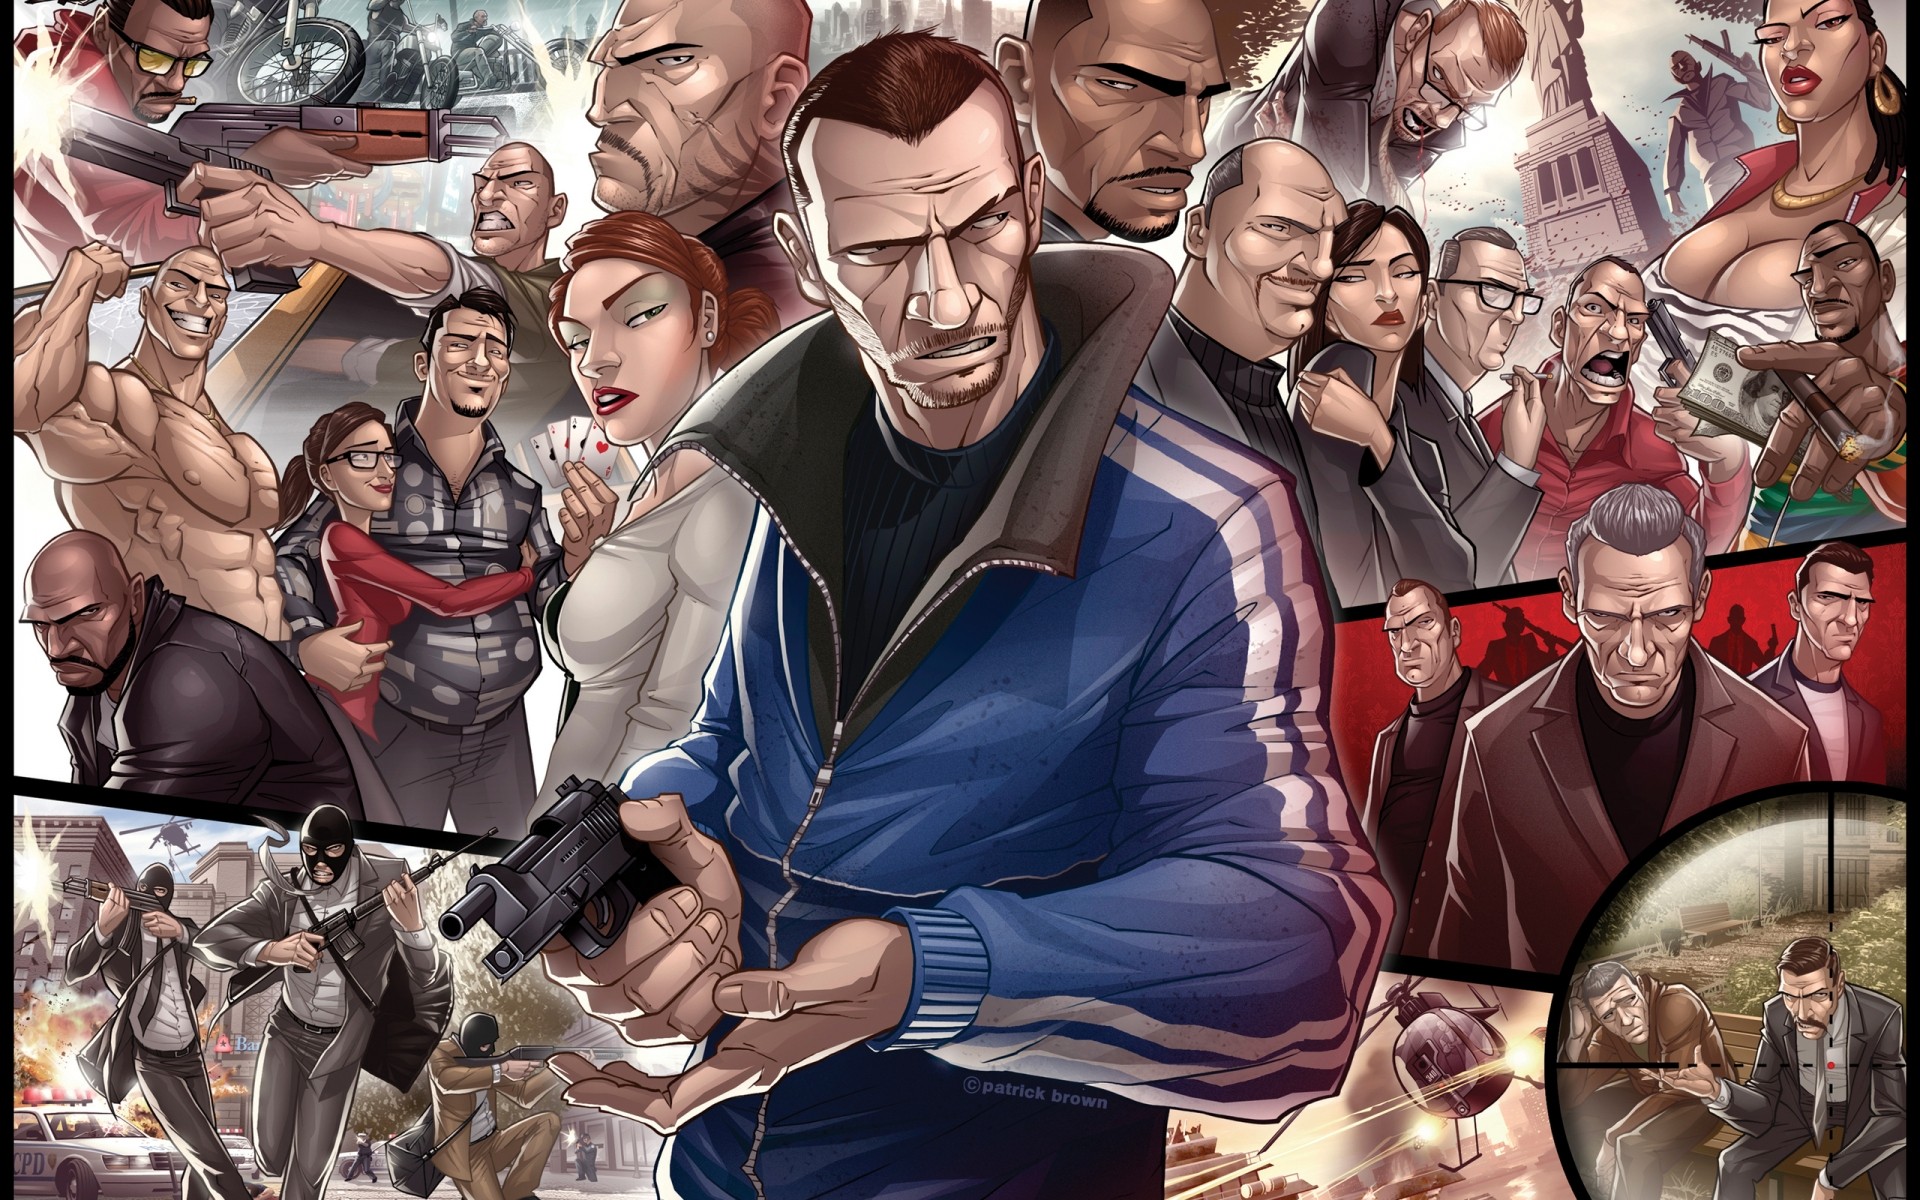 gta group man many woman games fight poster video